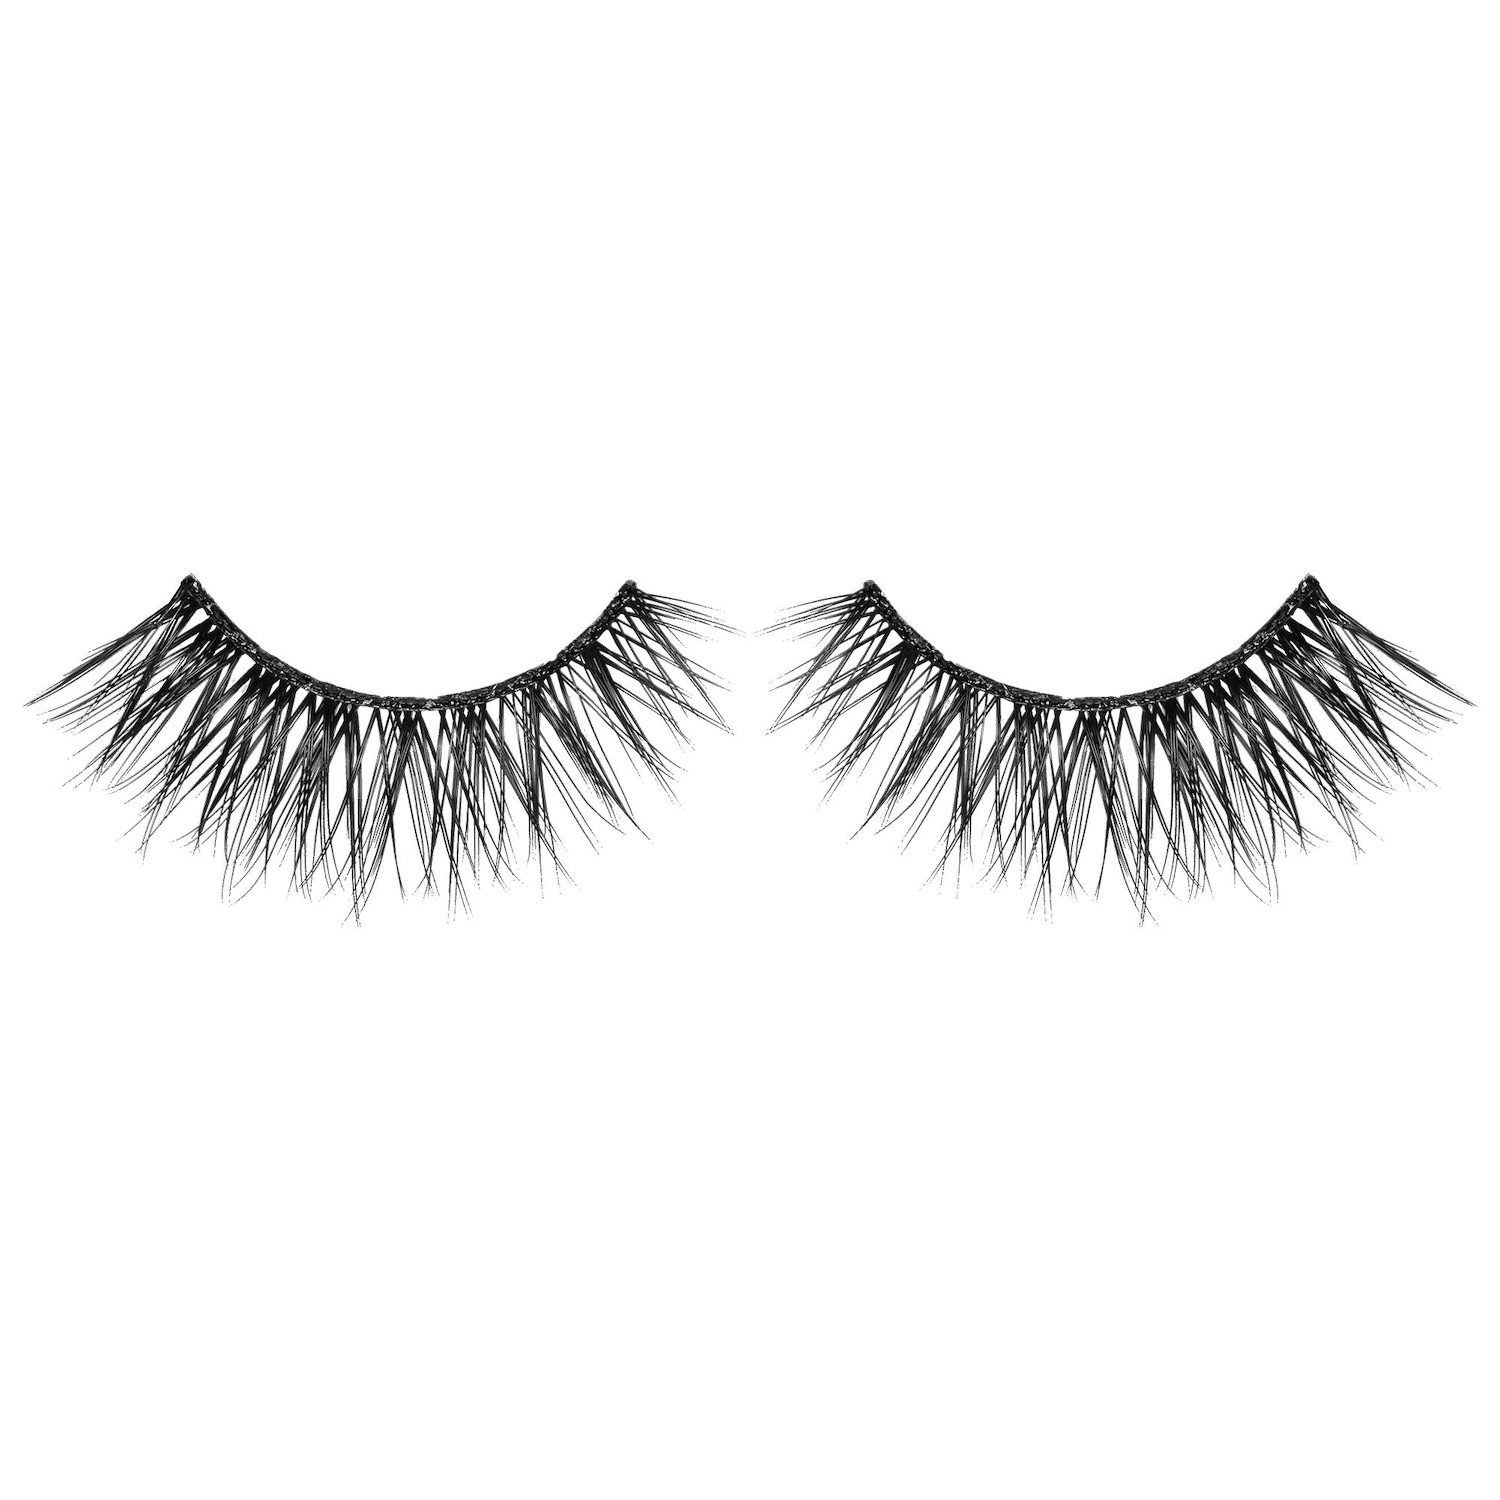 Image for HUDA BEAUTY Faux Mink Lash Collection at Kohl's.